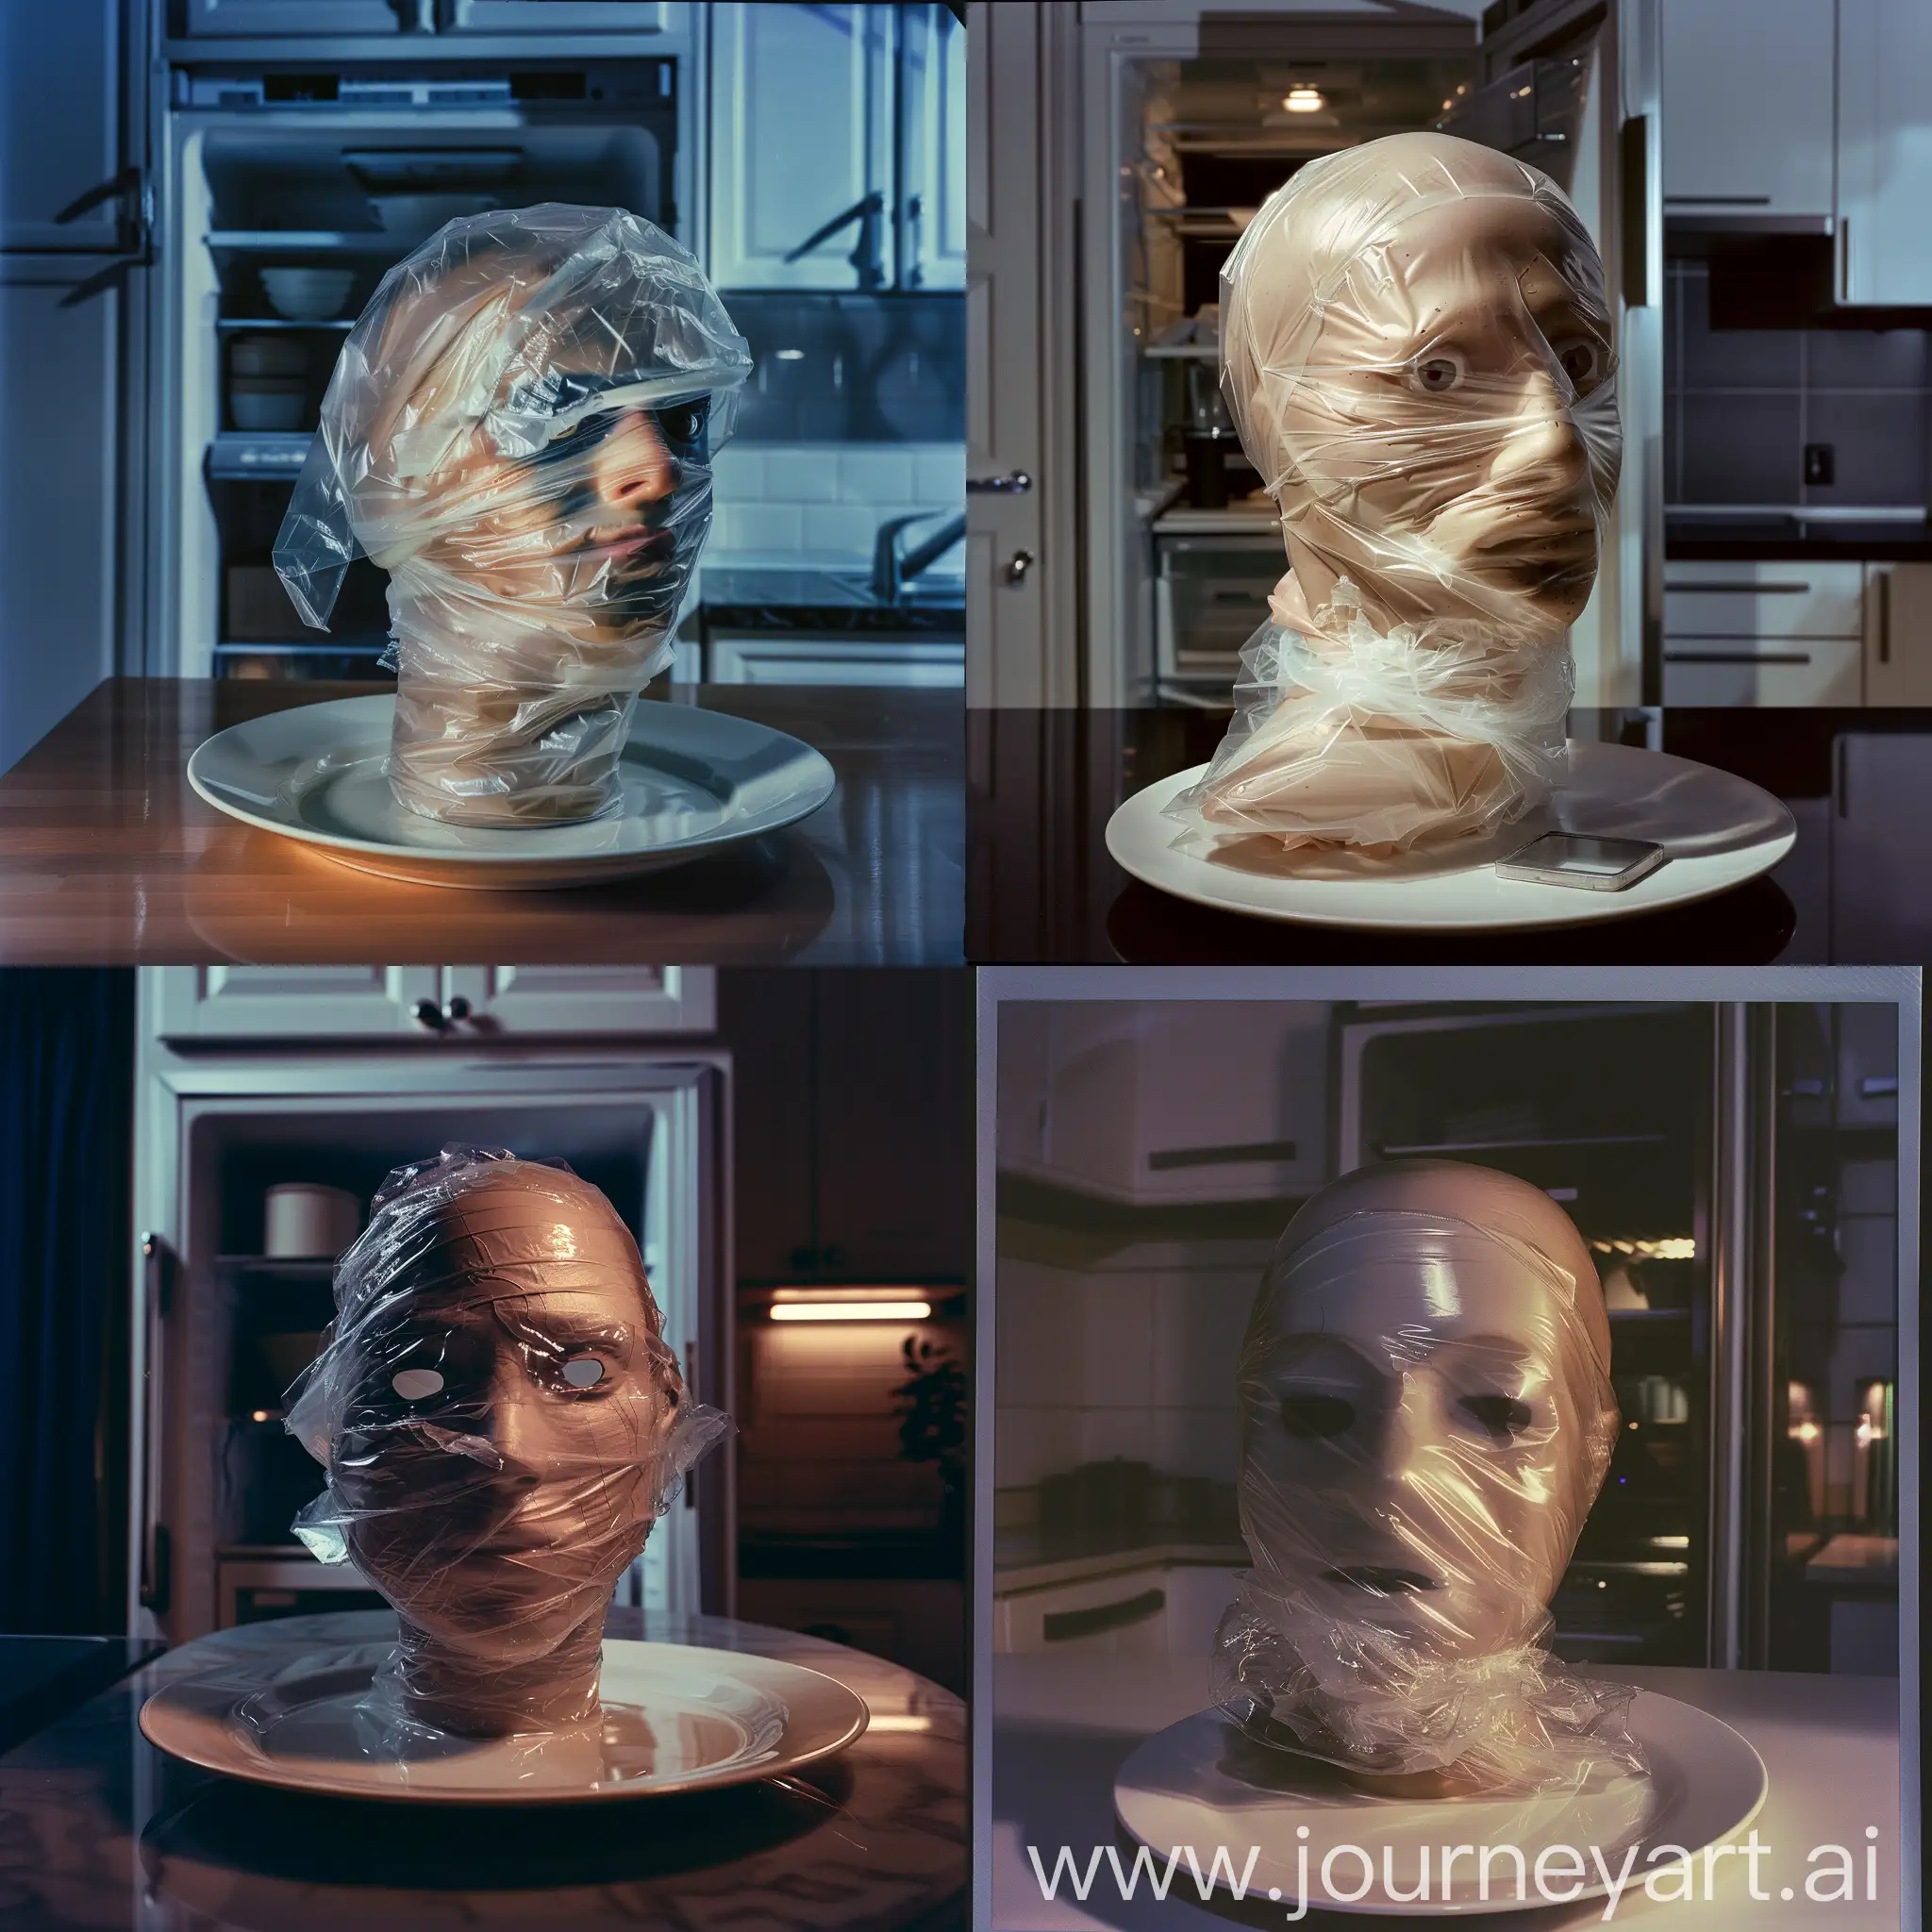 PlasticWrapped-Prototype-Head-in-Dark-Kitchen-Surreal-Evidence-Photo-Style